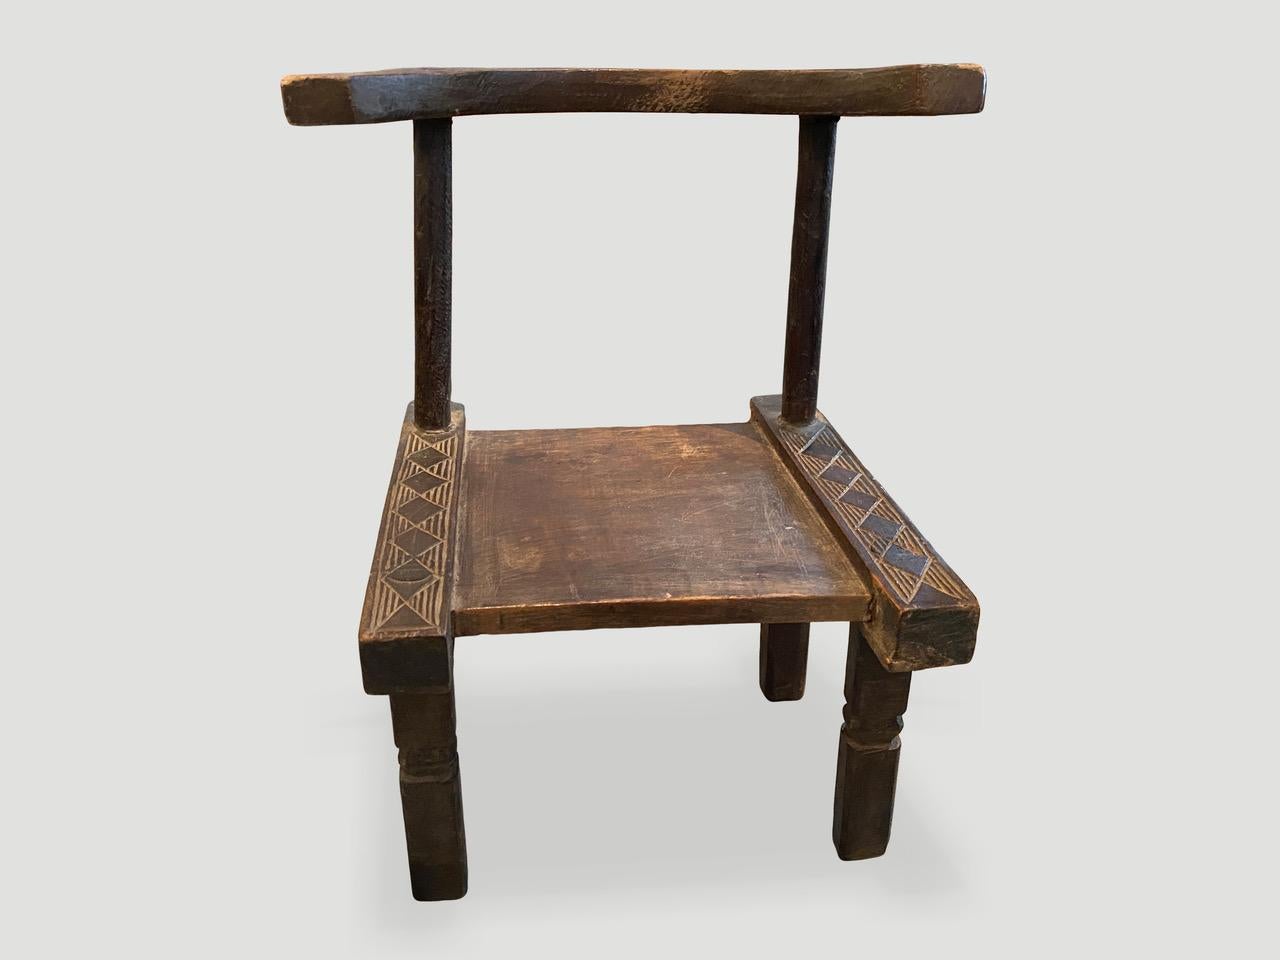 Primitive Andrianna Shamaris Antique African Wooden Chair or Side Table For Sale